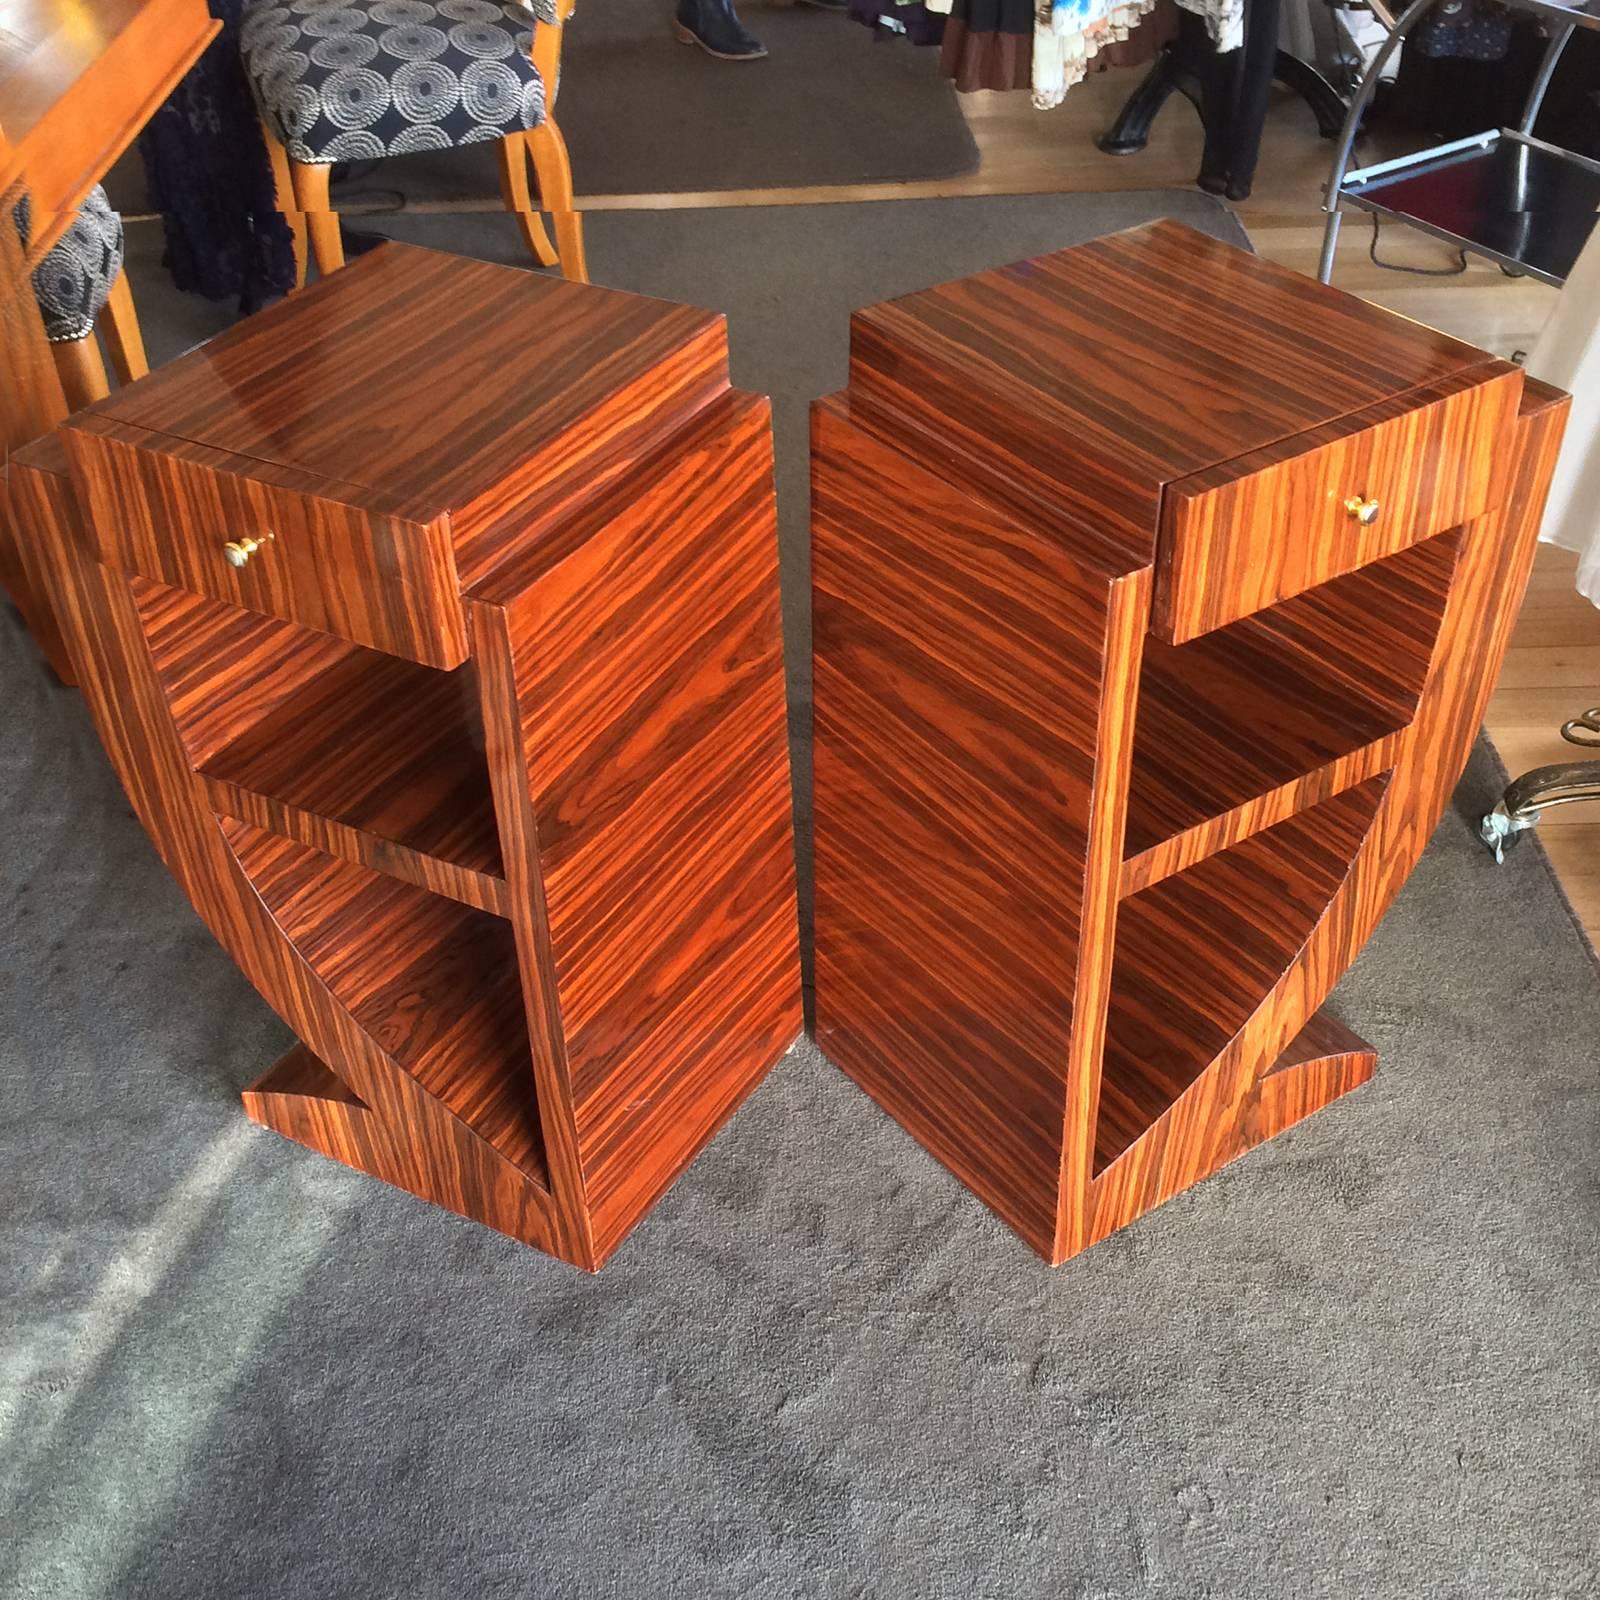 German Pair of Art Deco Style High Geometric Bedside Tables or Sofa Tables